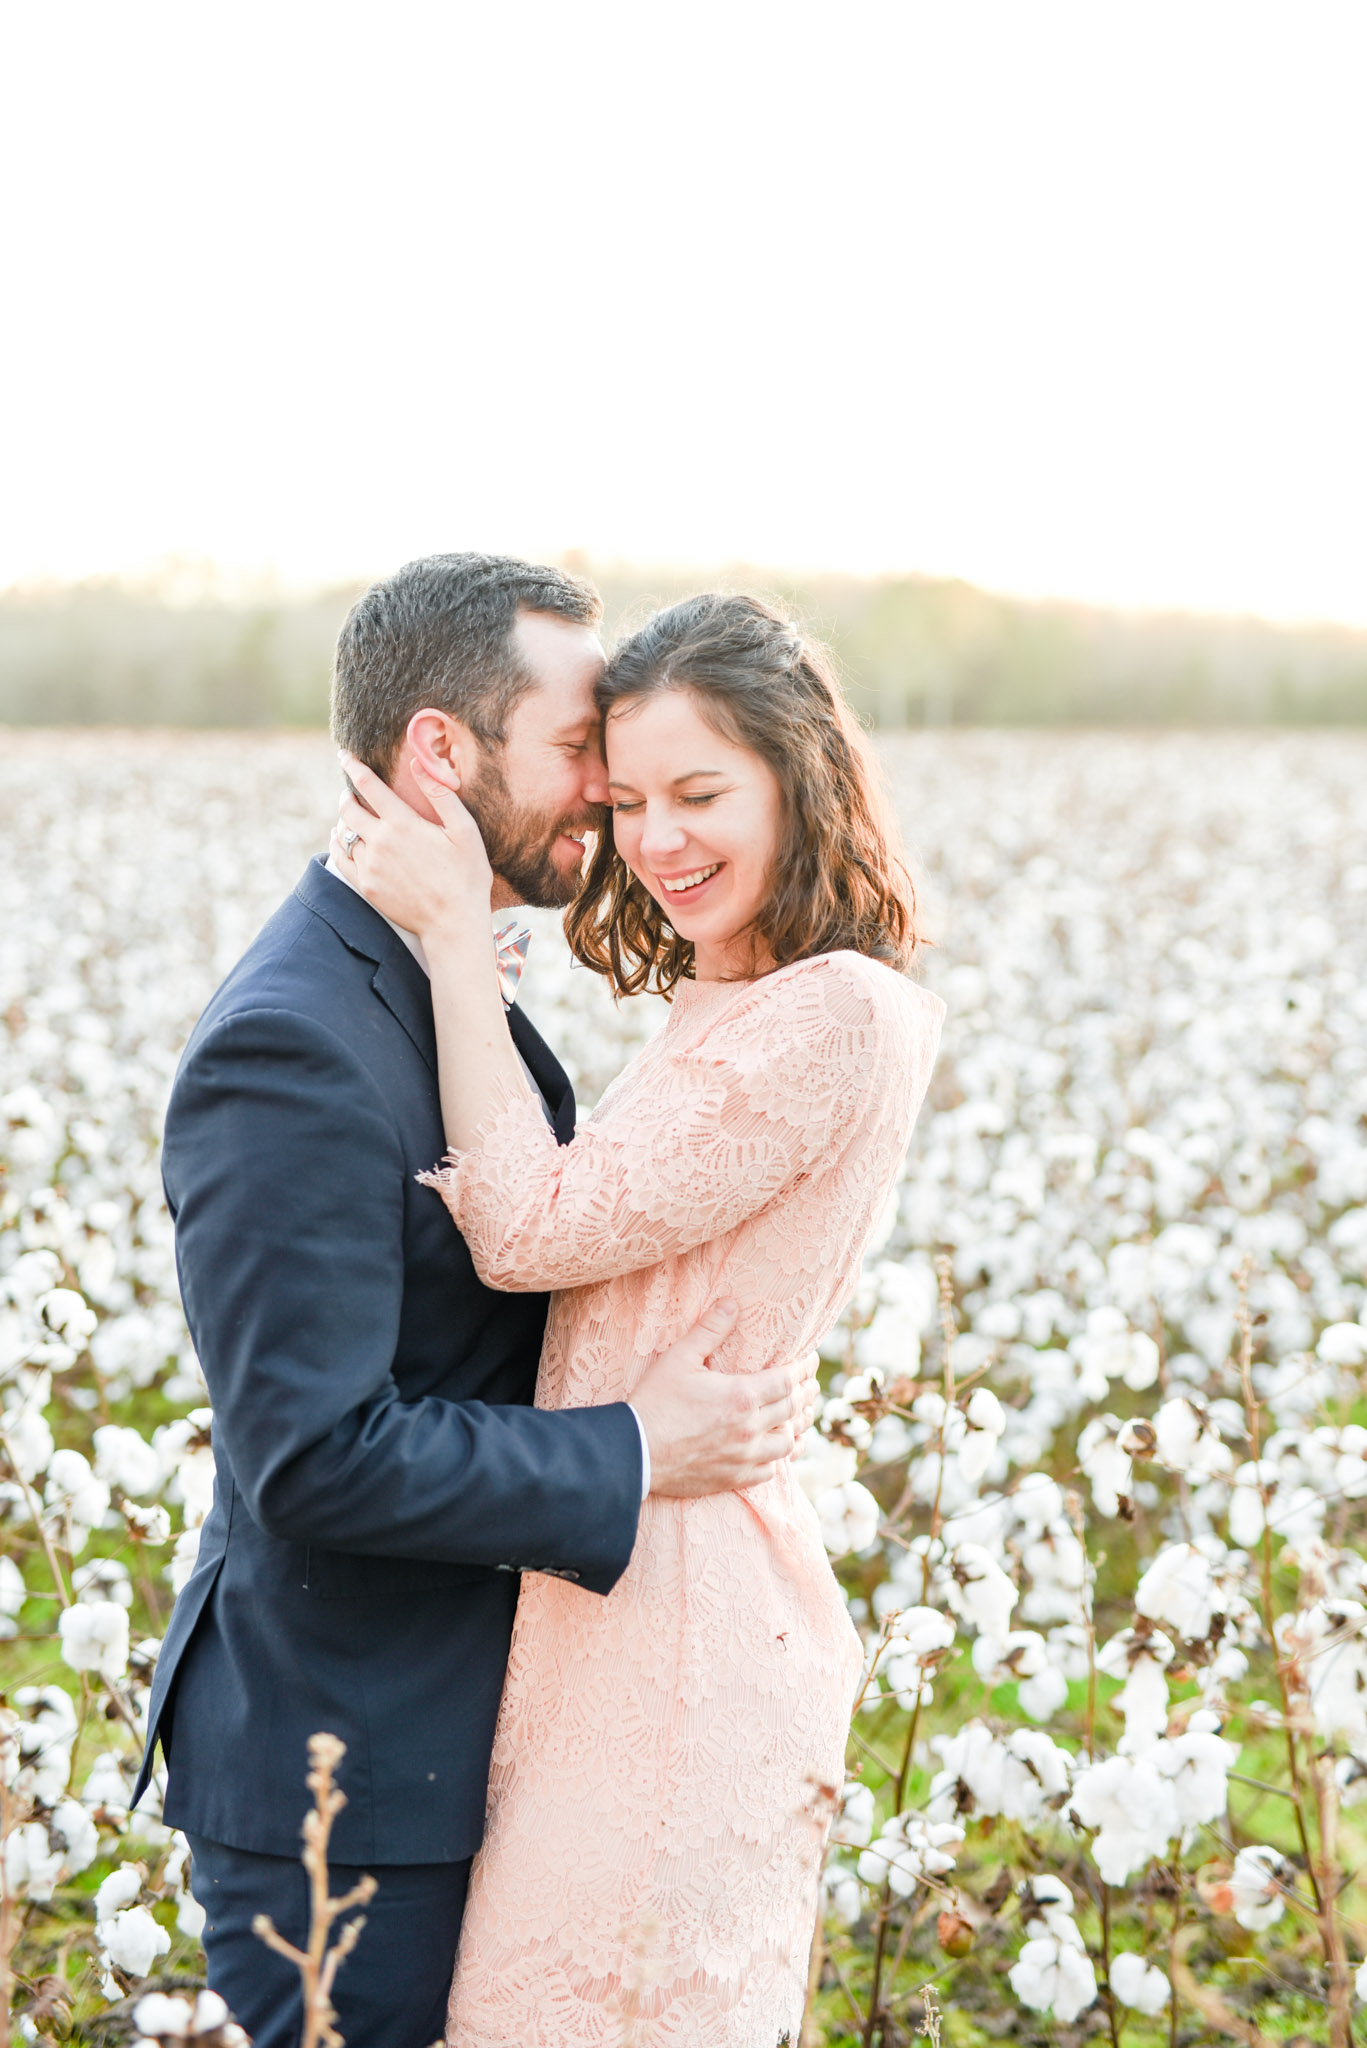 Man and woman laugh at sunset in cotton field.